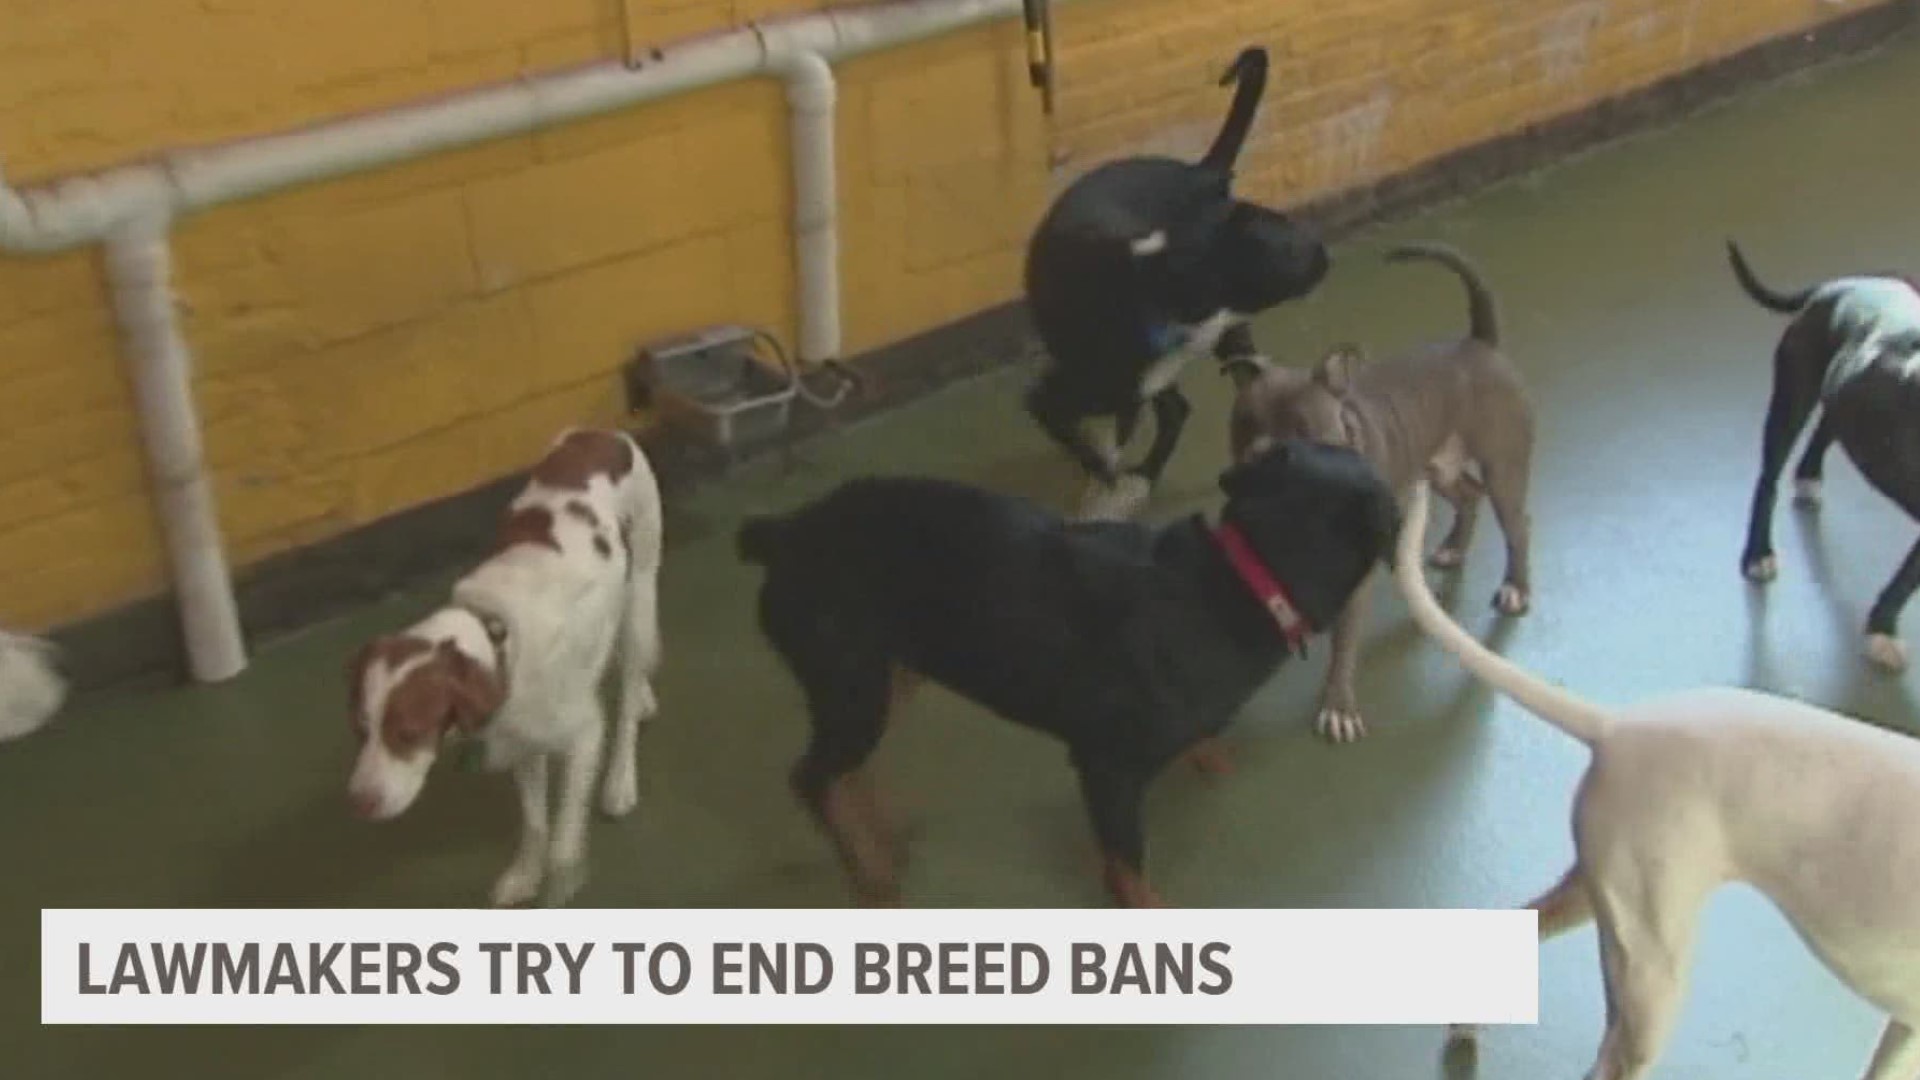 Opponents of the legislation say some breeds are more dangerous than others, and are a liability to communities.